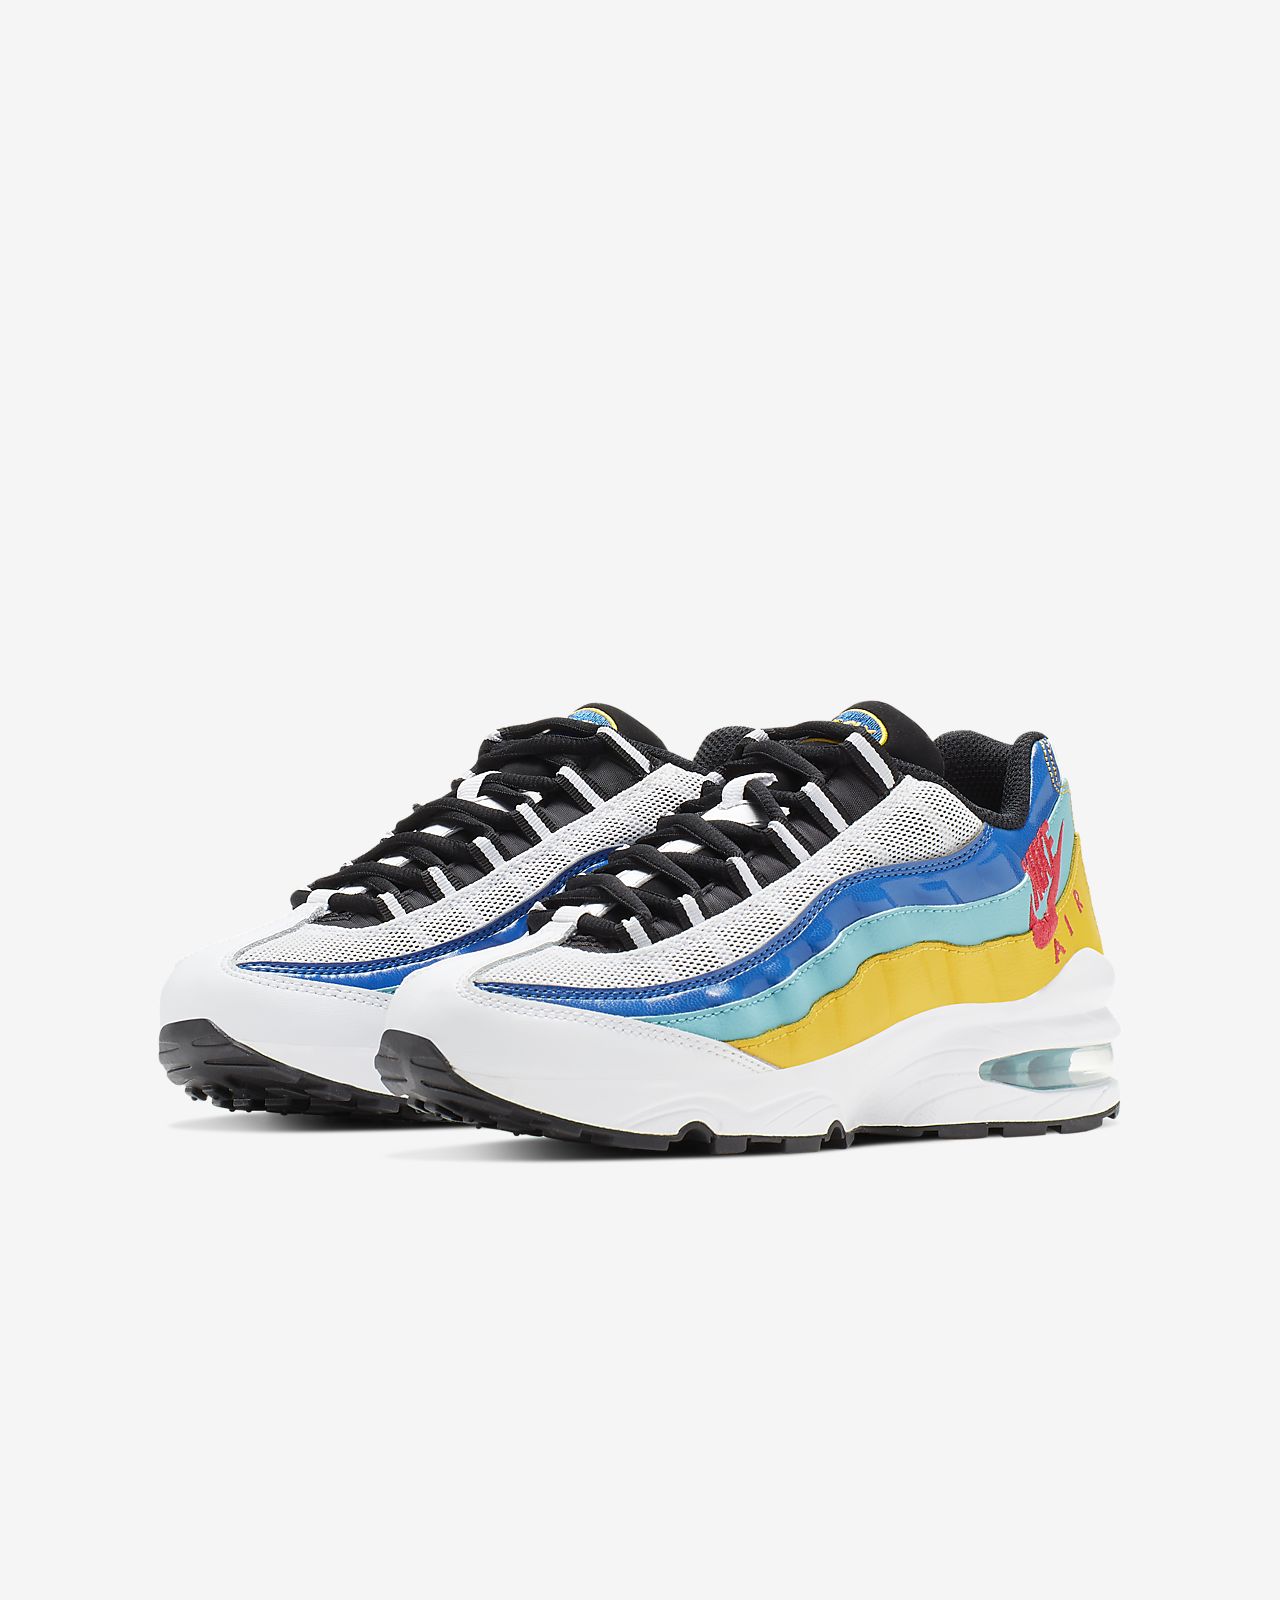 nike air max 95 yellow- OFF 68% - www 